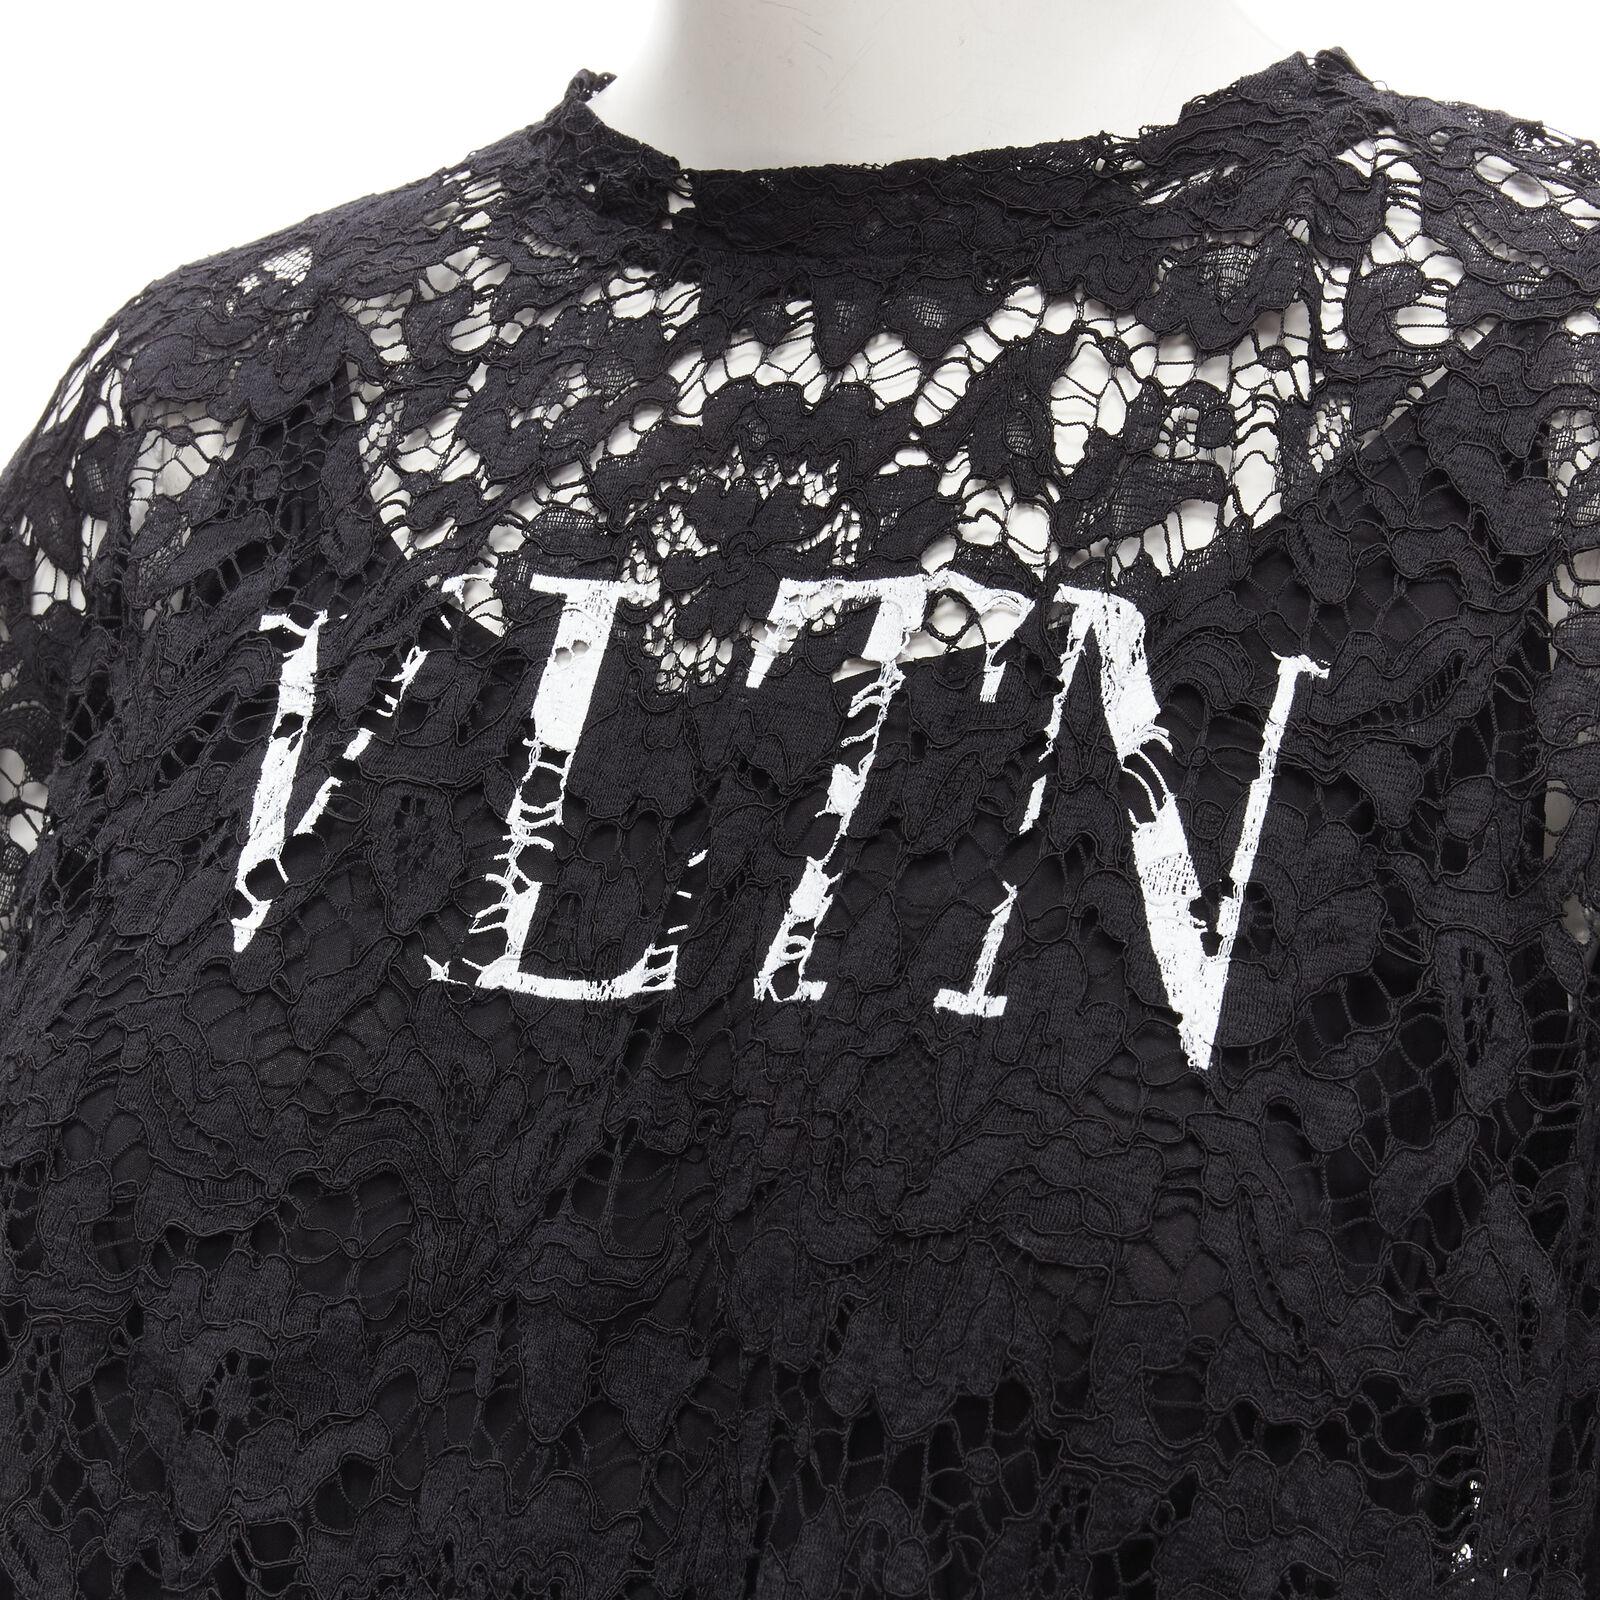 VALENTINO VLTN logo black lace white full floral lace playsuit romper XS
Reference: AAWC/A00153
Brand: Valentino
Designer: Pier Paolo Piccioli
Collection: VLTN Logo
Material: Lace
Color: Black, White
Pattern: Lace
Closure: Zip
Lining: Viscose
Extra